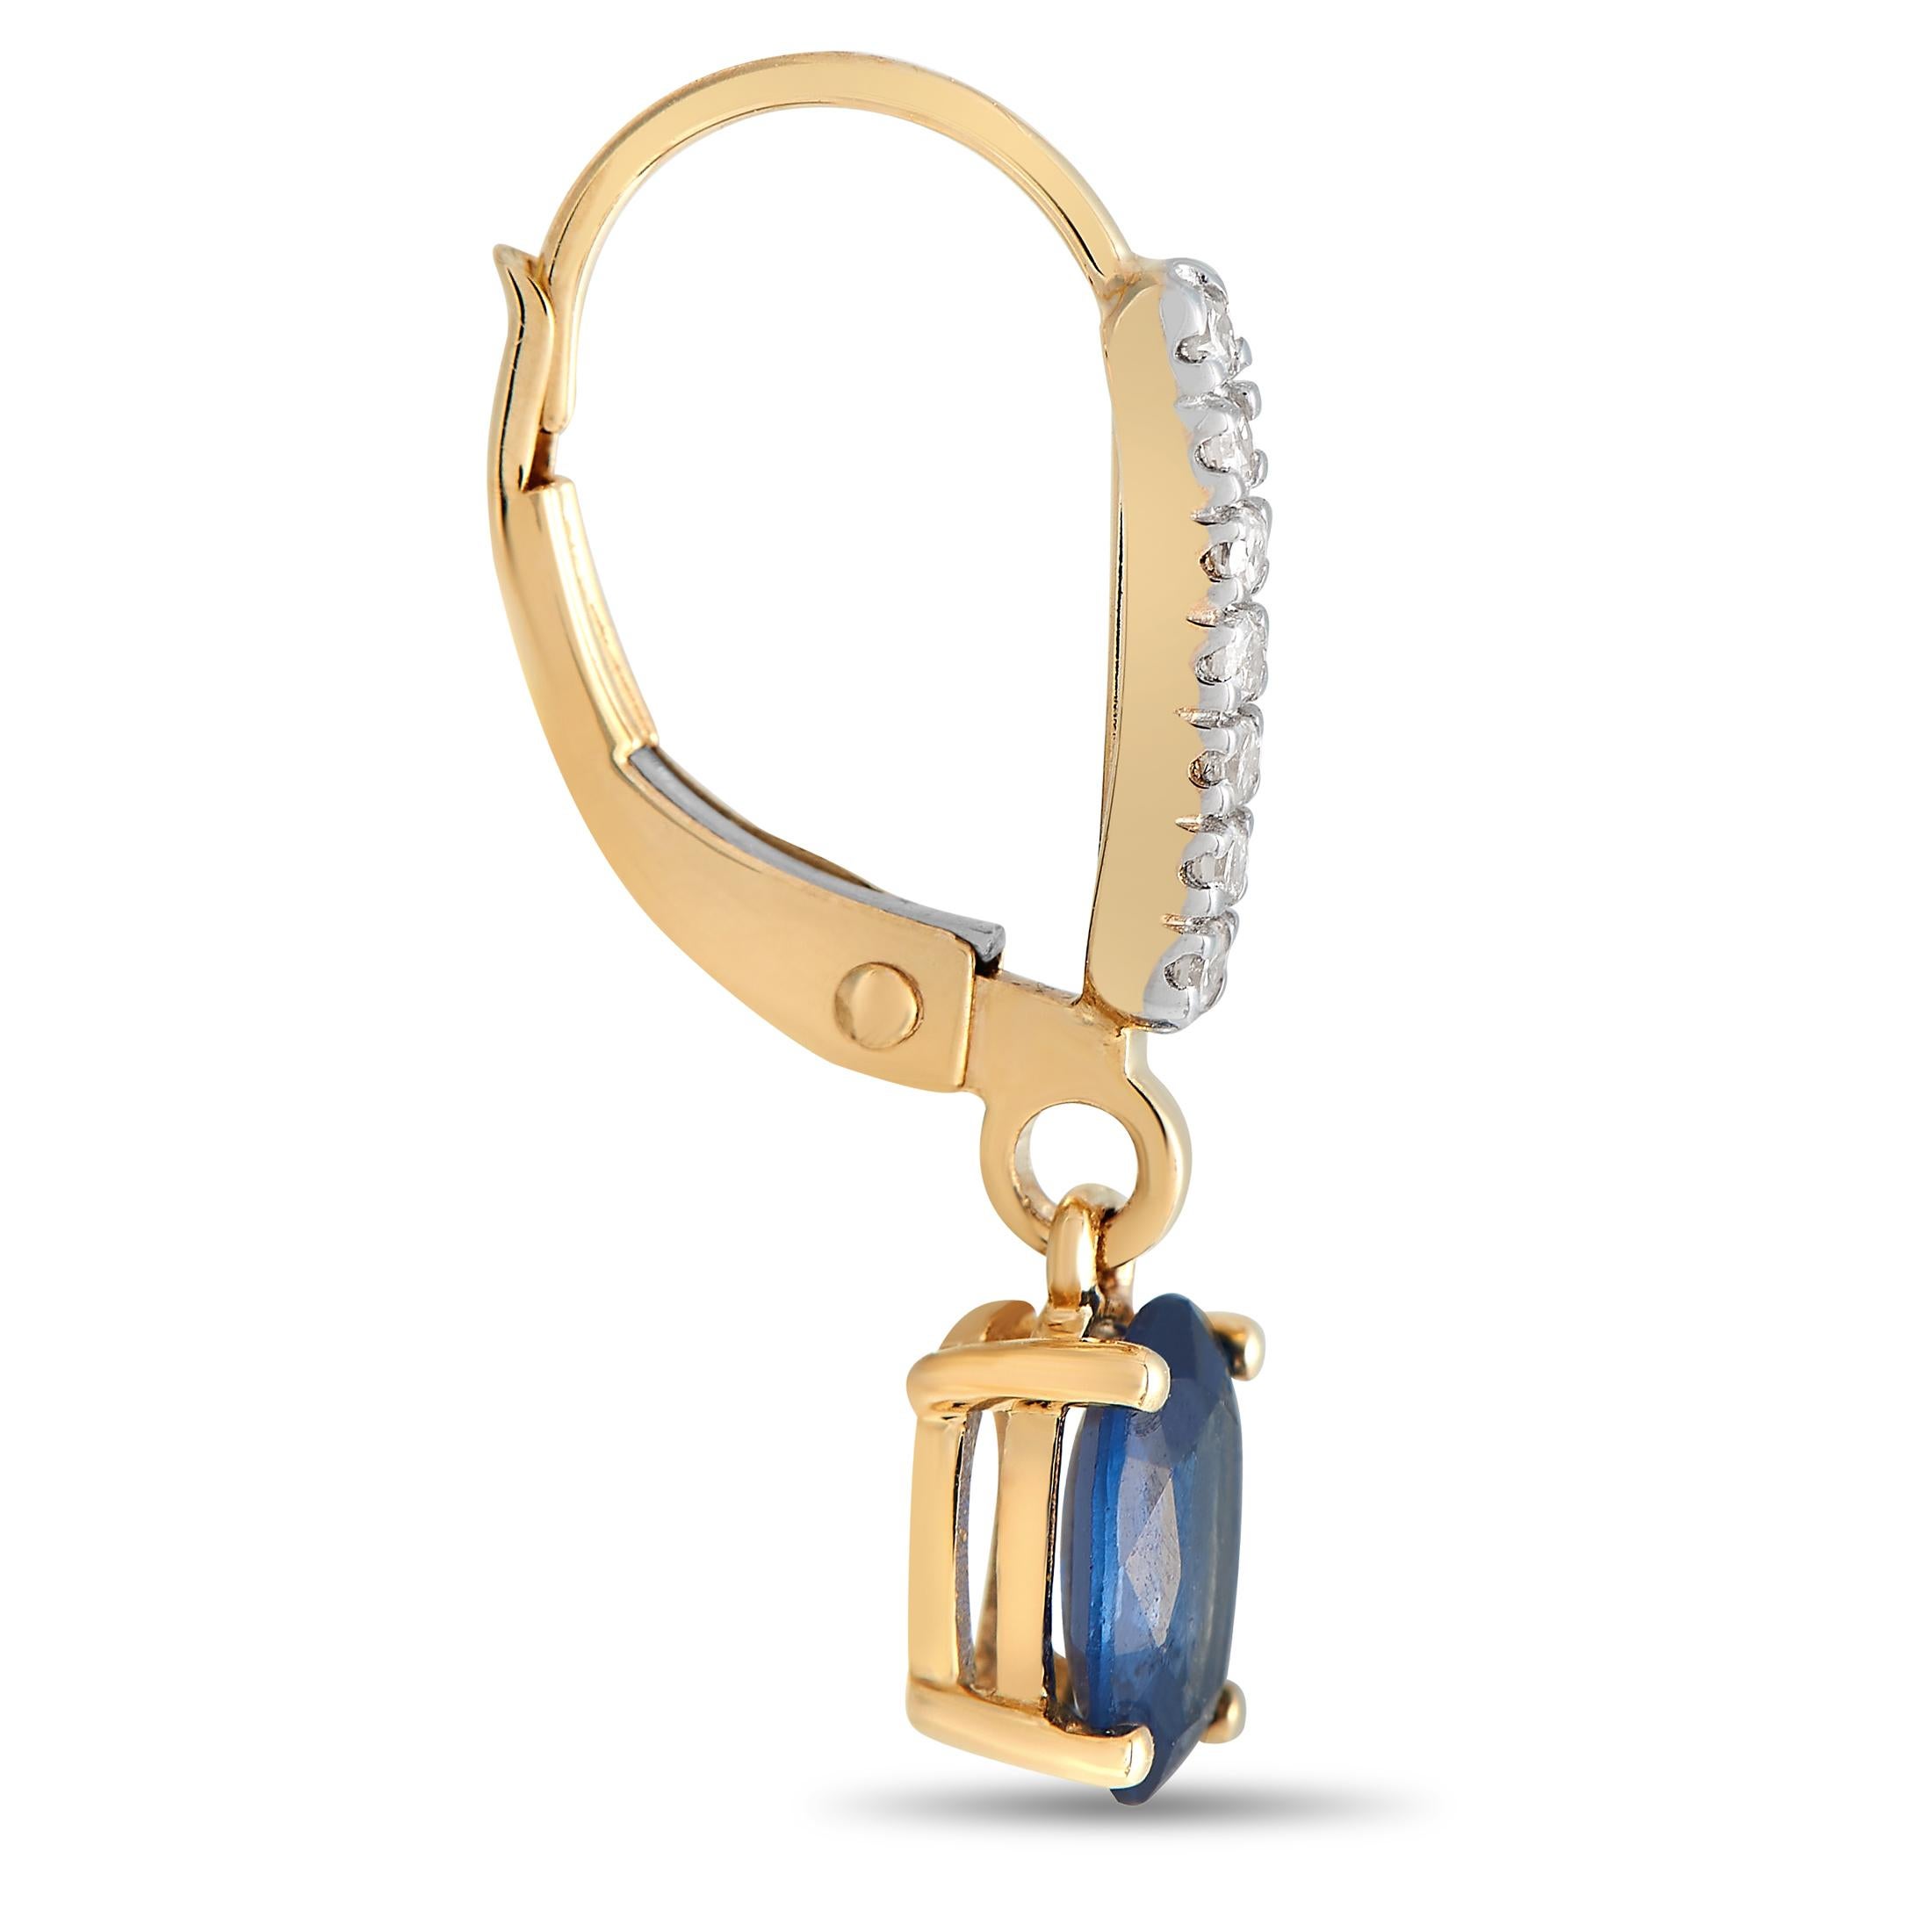 Stunning oval-shaped Sapphire gemstones are elevated by sparkling Diamond accents totaling 0.10 carats on these impressive luxury earrings. Simple, elegant, and understated, each one features a 14K Yellow Gold setting measuring 0.75 long by 0.15